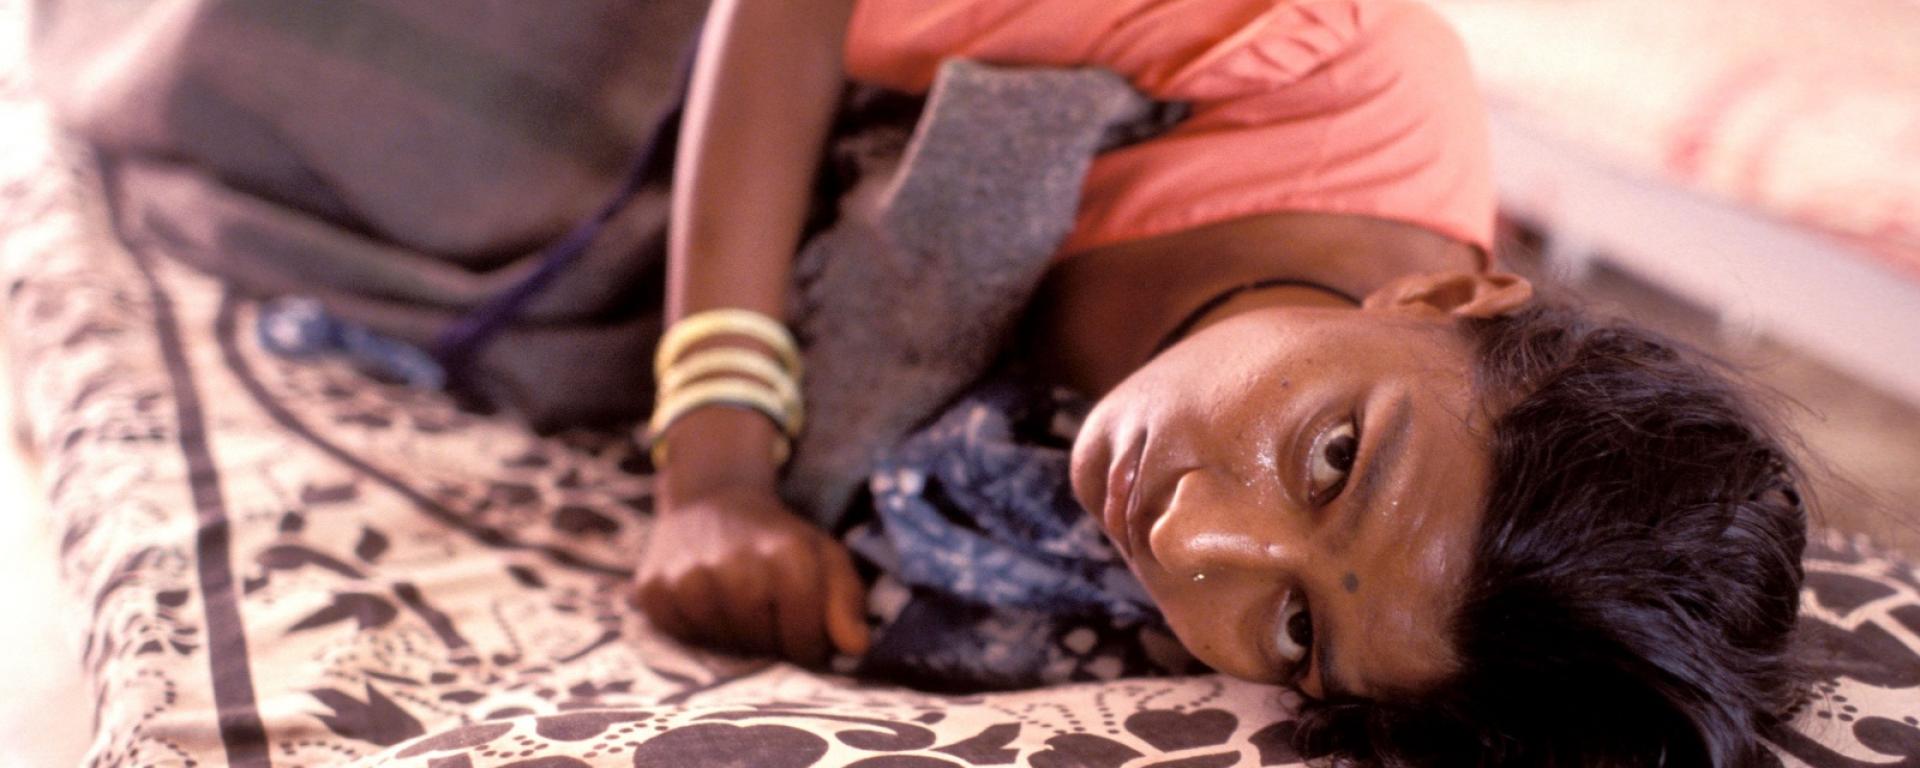 Woman with AIDS in a hospital in India (© John Isaac / World Bank)